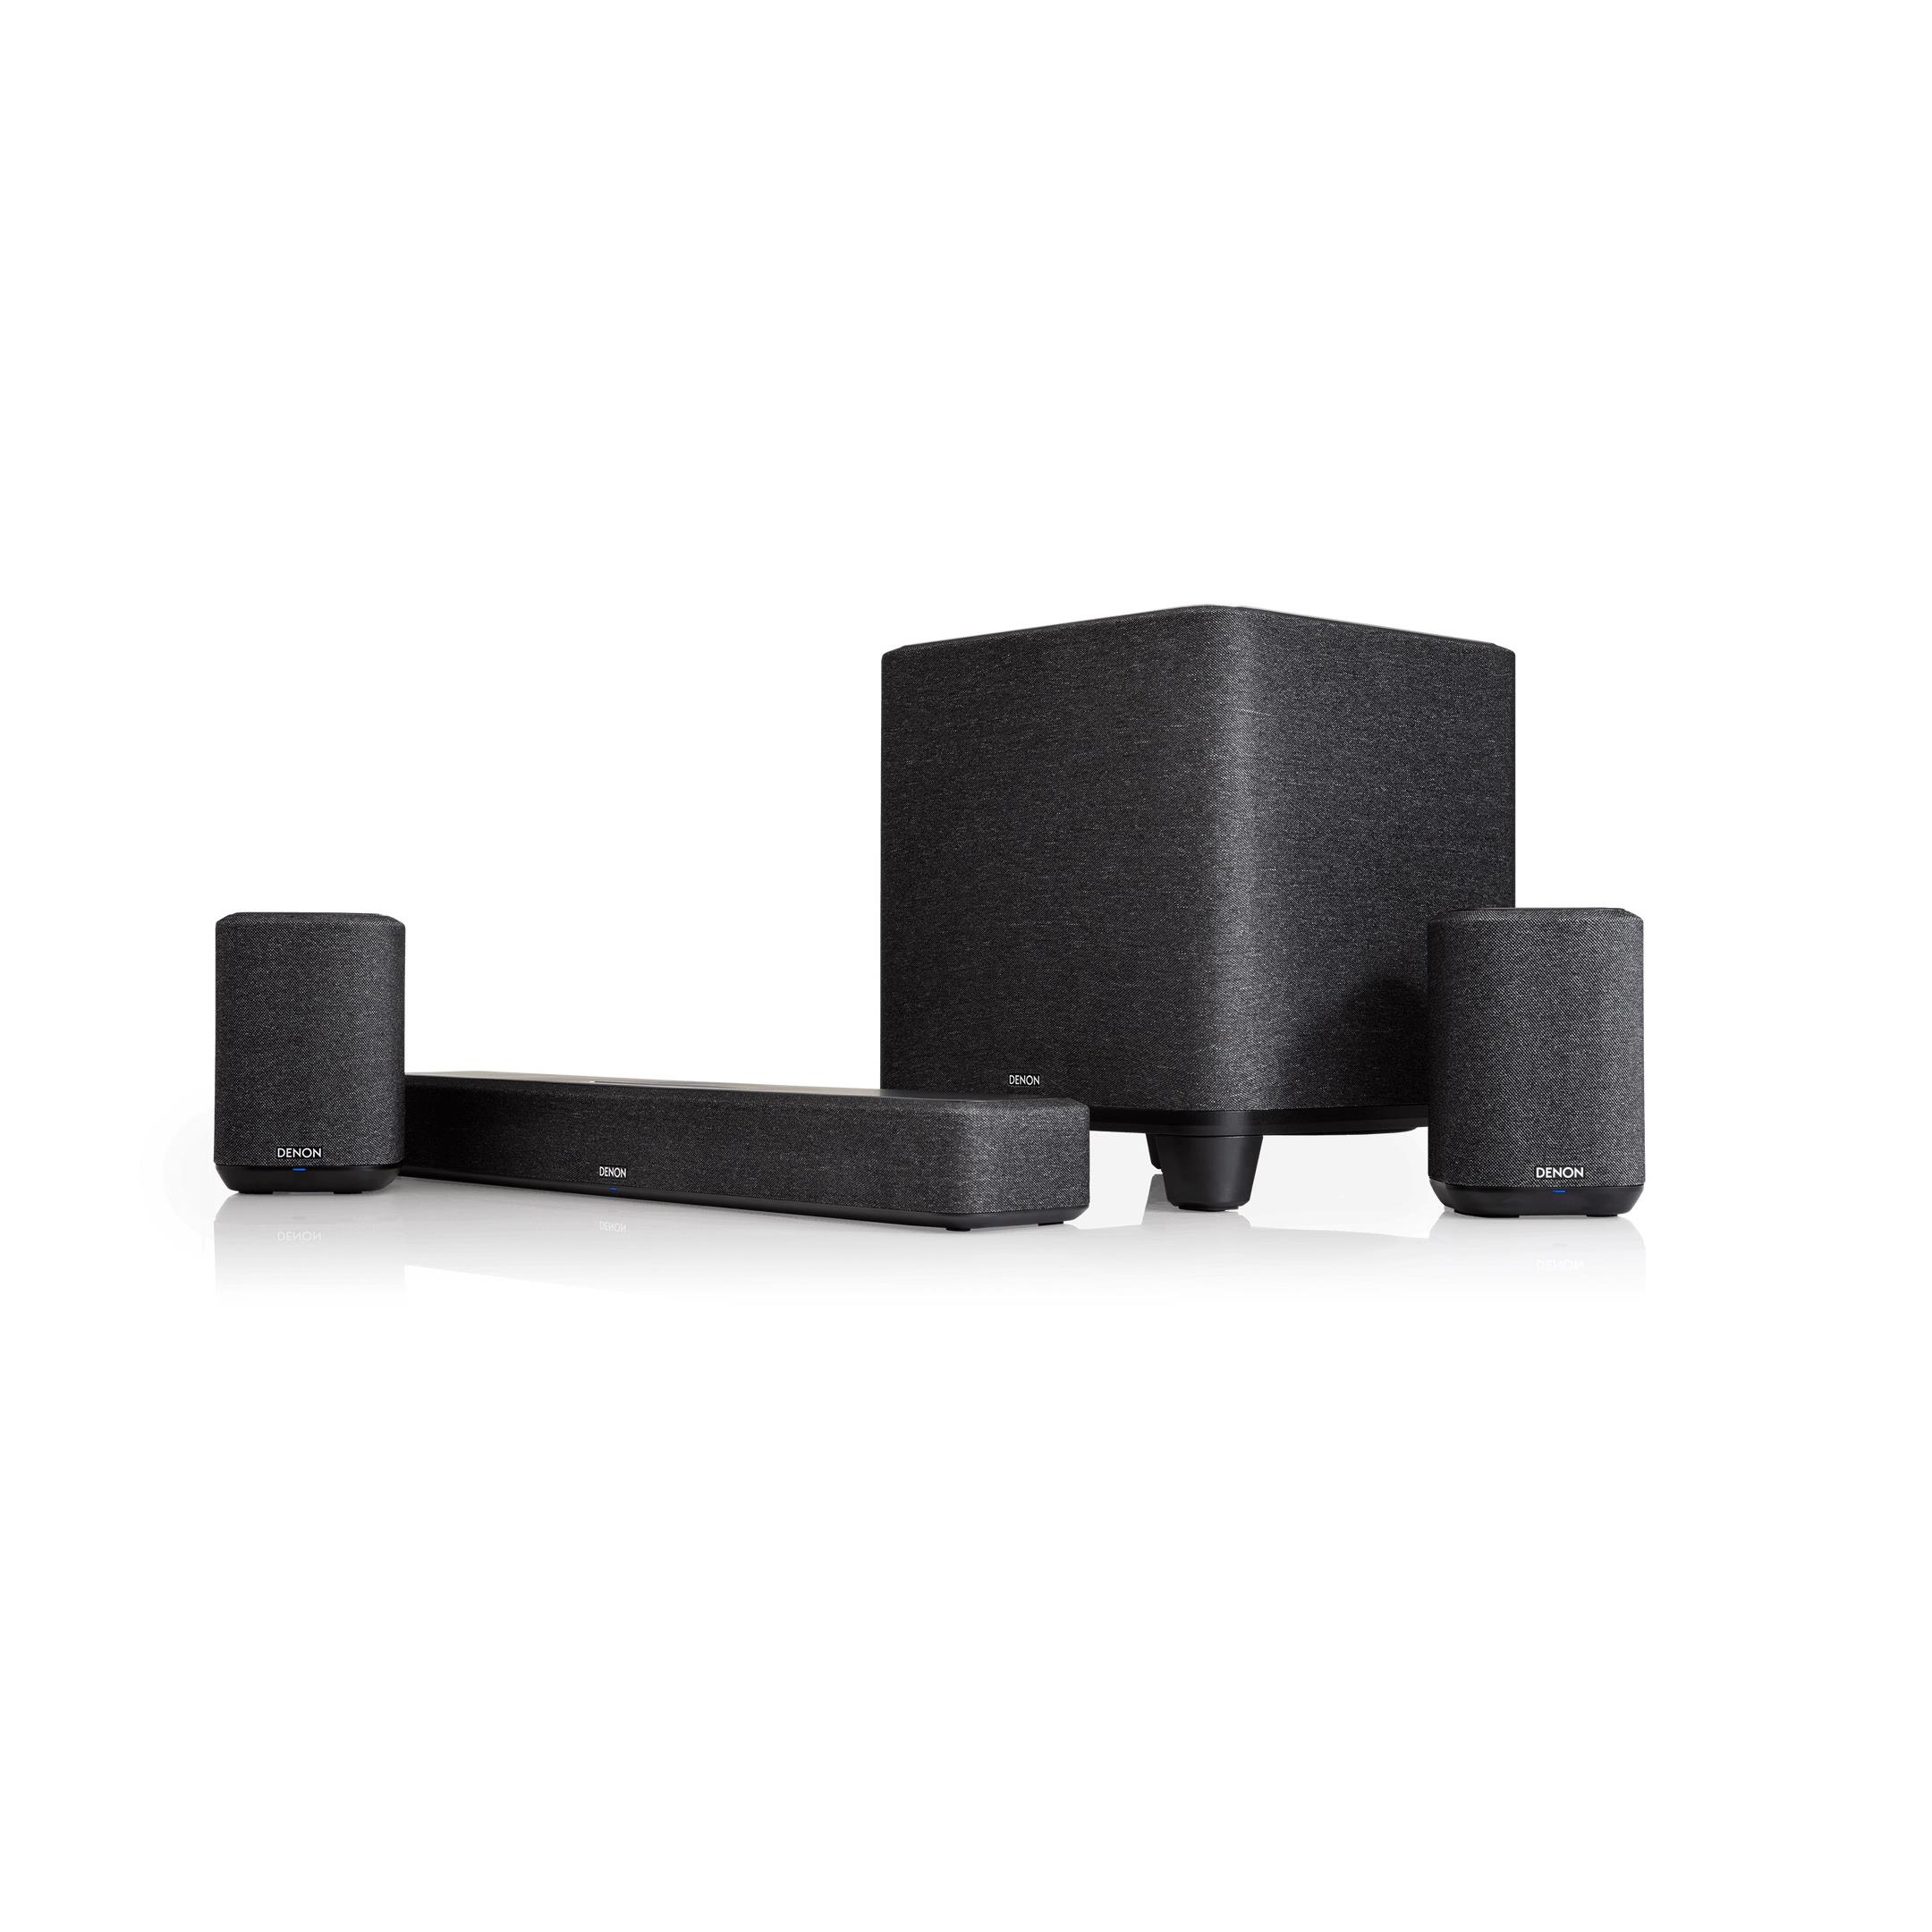 Denon Home Wireless 5.1 Home Theater System with Subwoofer - Black